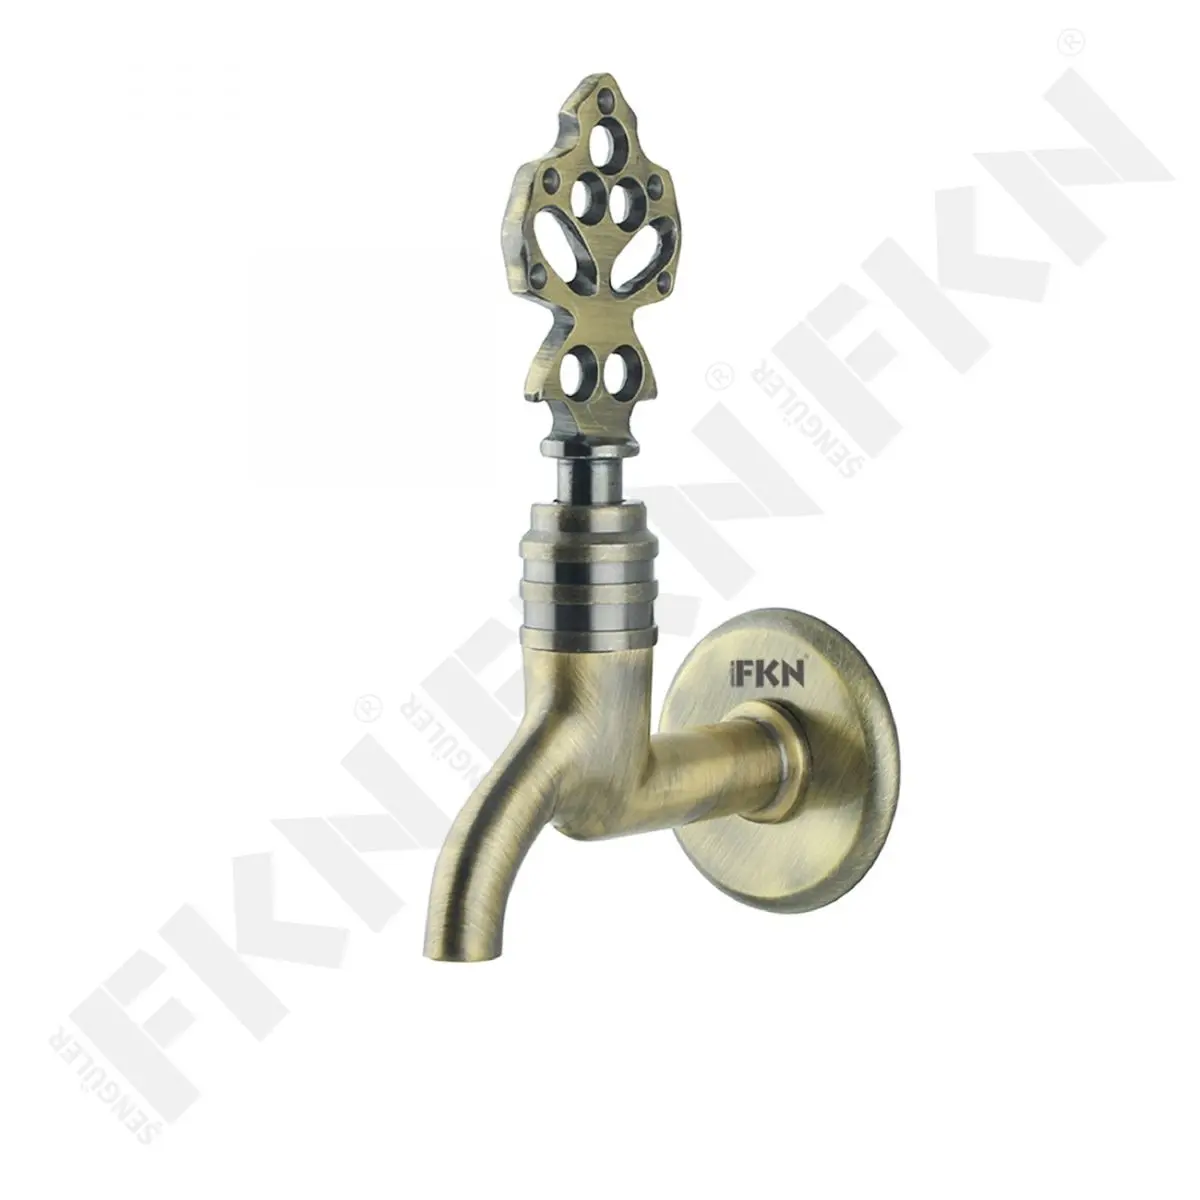 

FKN Decorative Brass Outdoor Faucet Short Body Antique Ottoman Tap Garden Traditional Bathroom Balcony Single Holder Single Hole Wall Mounted Faucets Washing Machine Luxury Taps